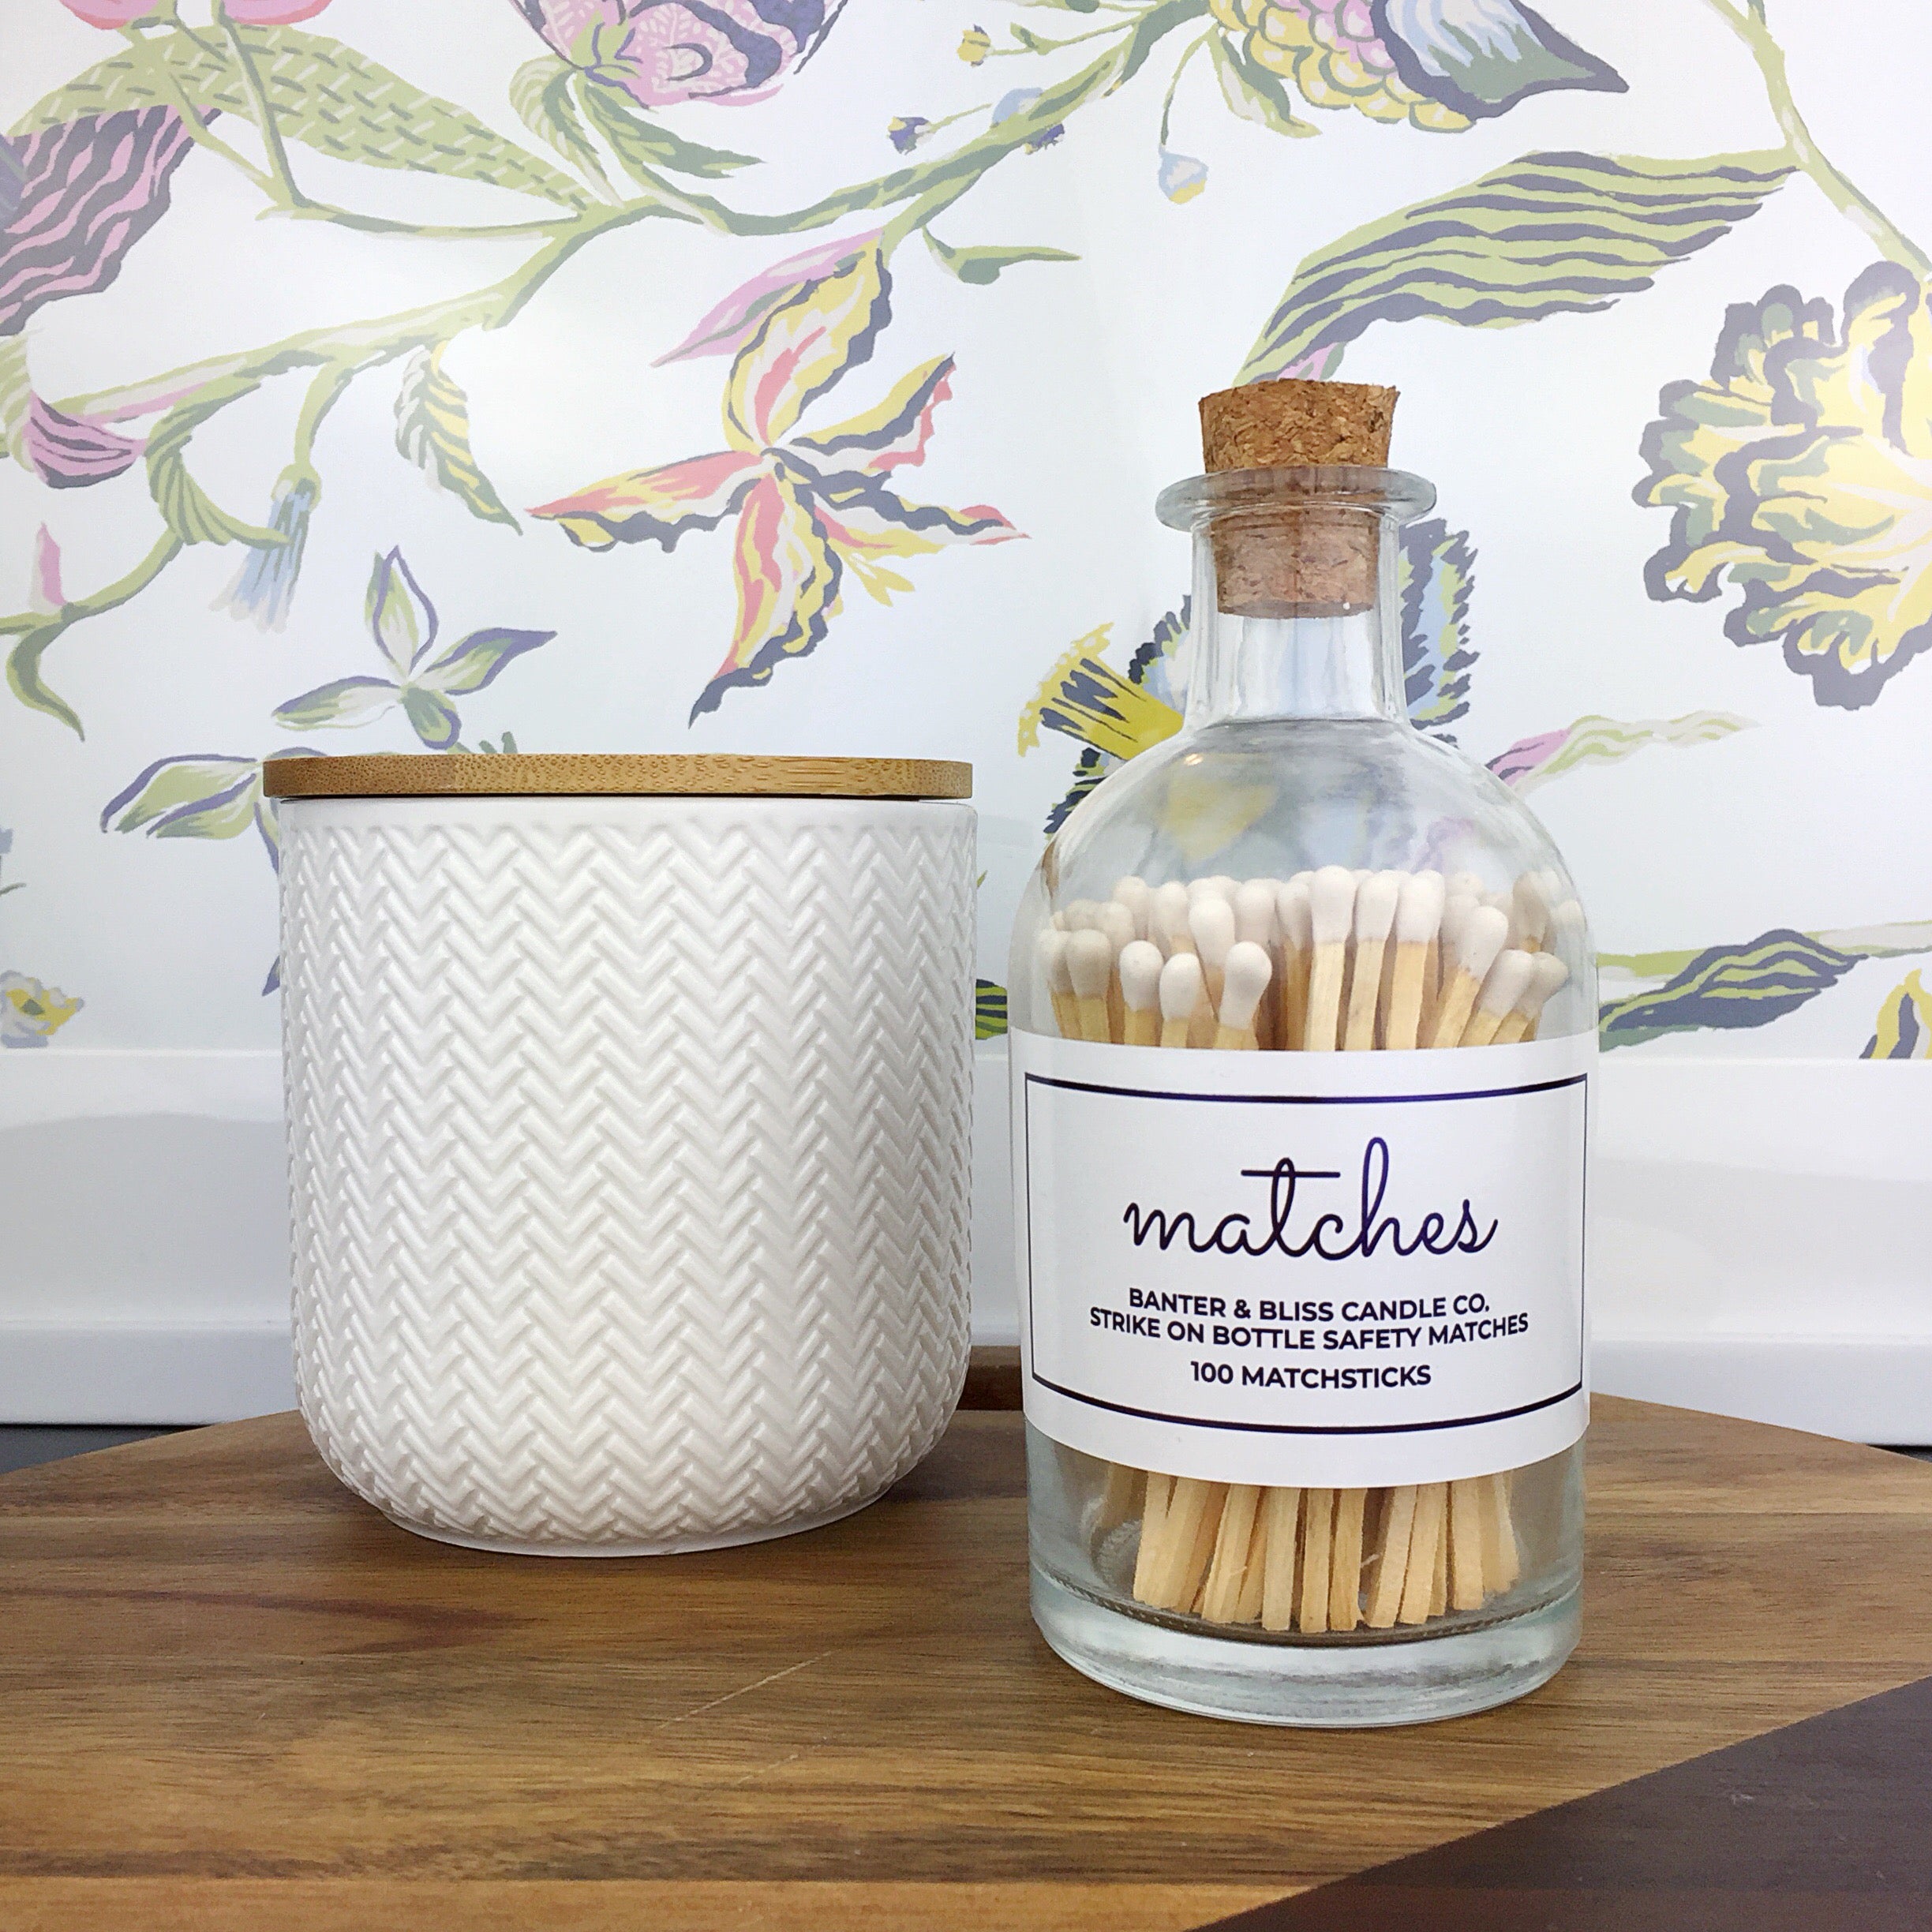 Matches · Apothecary Matchstick Bottle with Striker · 100 Long White Safety Matches